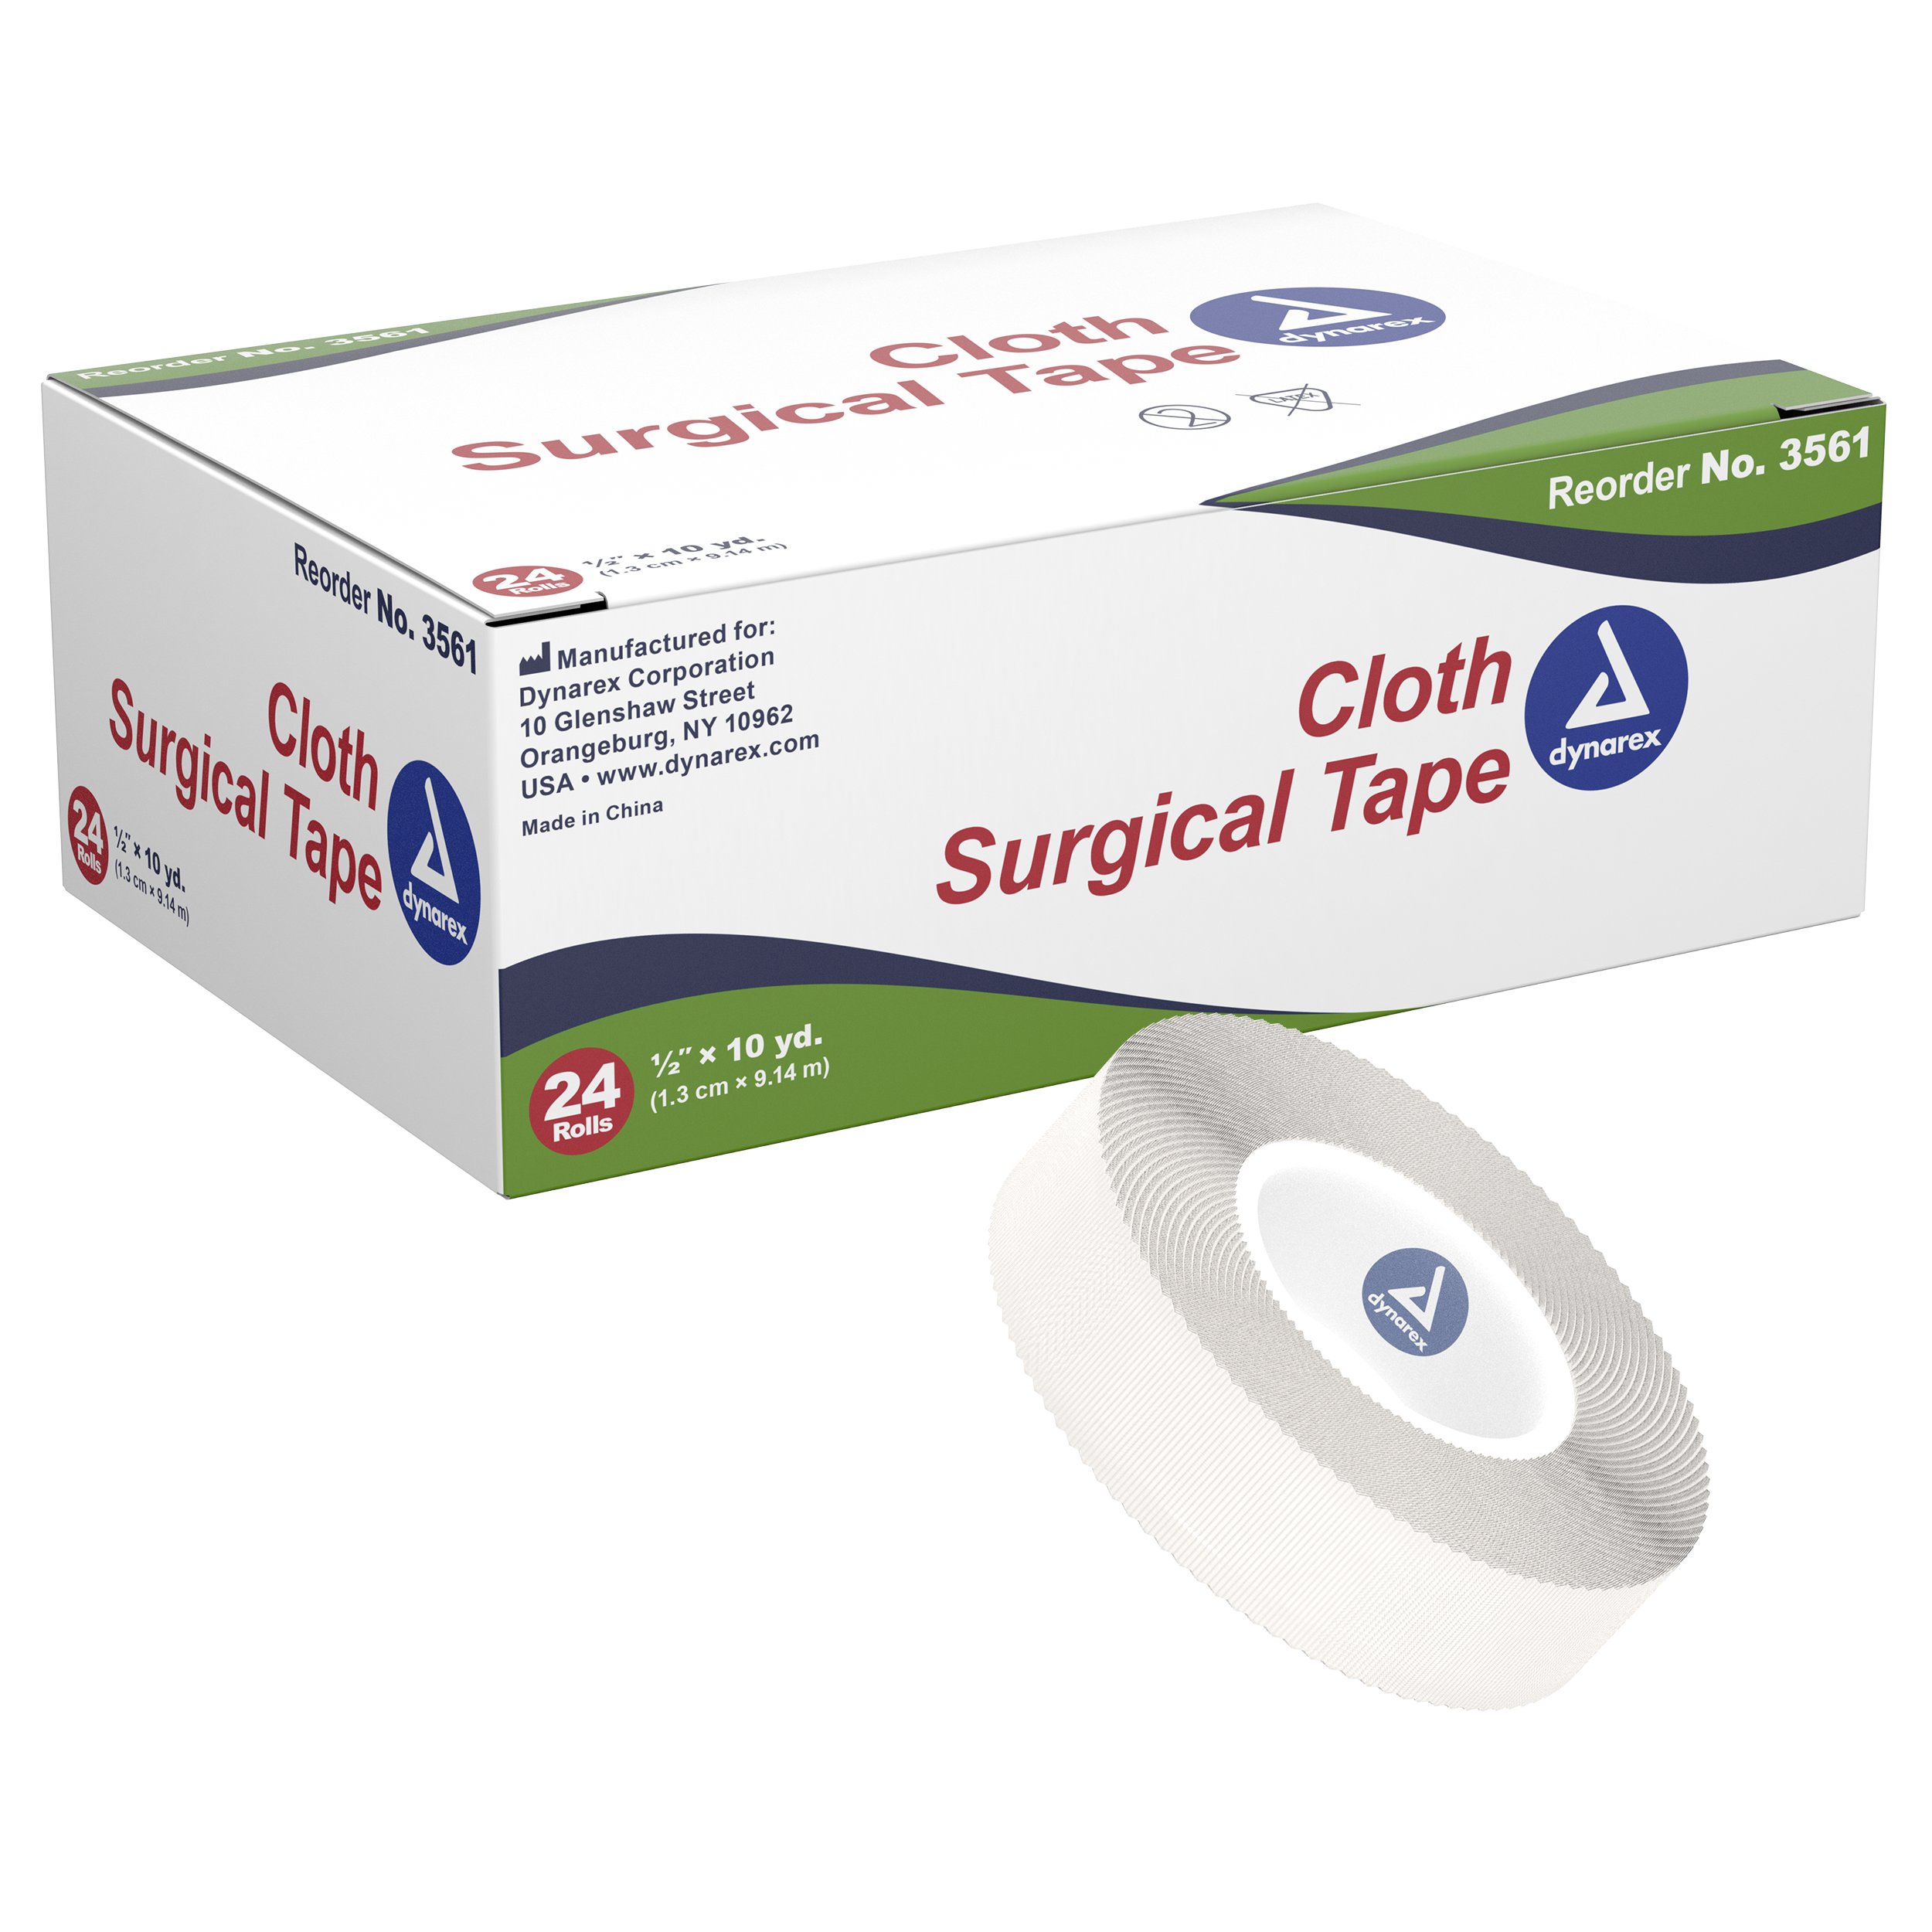 Cloth Surgical Tape - 1/2